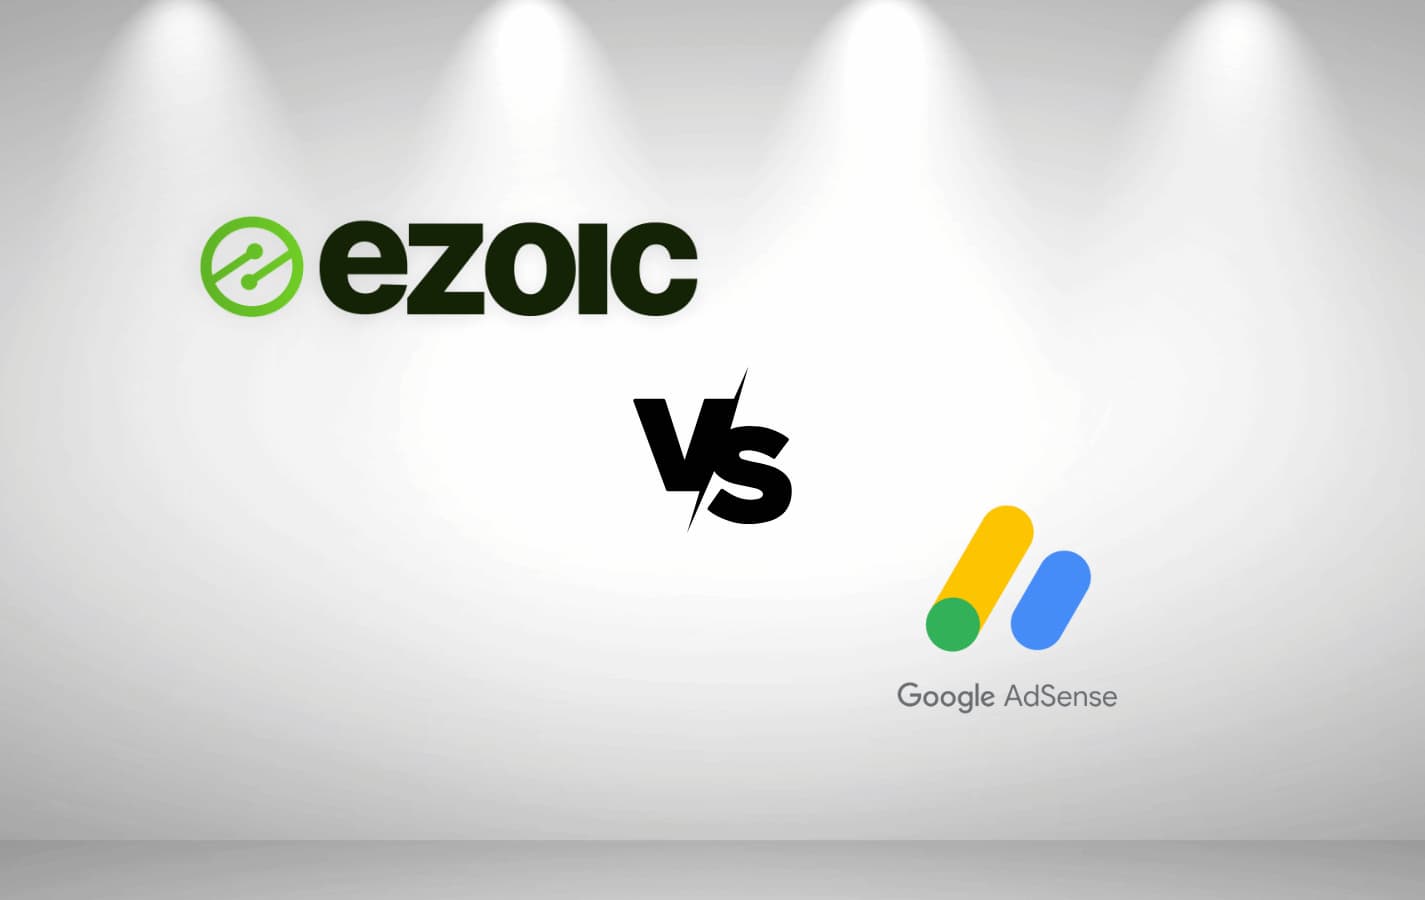 White background with spotlights shooting down onto the Ezoic and Google AdSense logos displayed